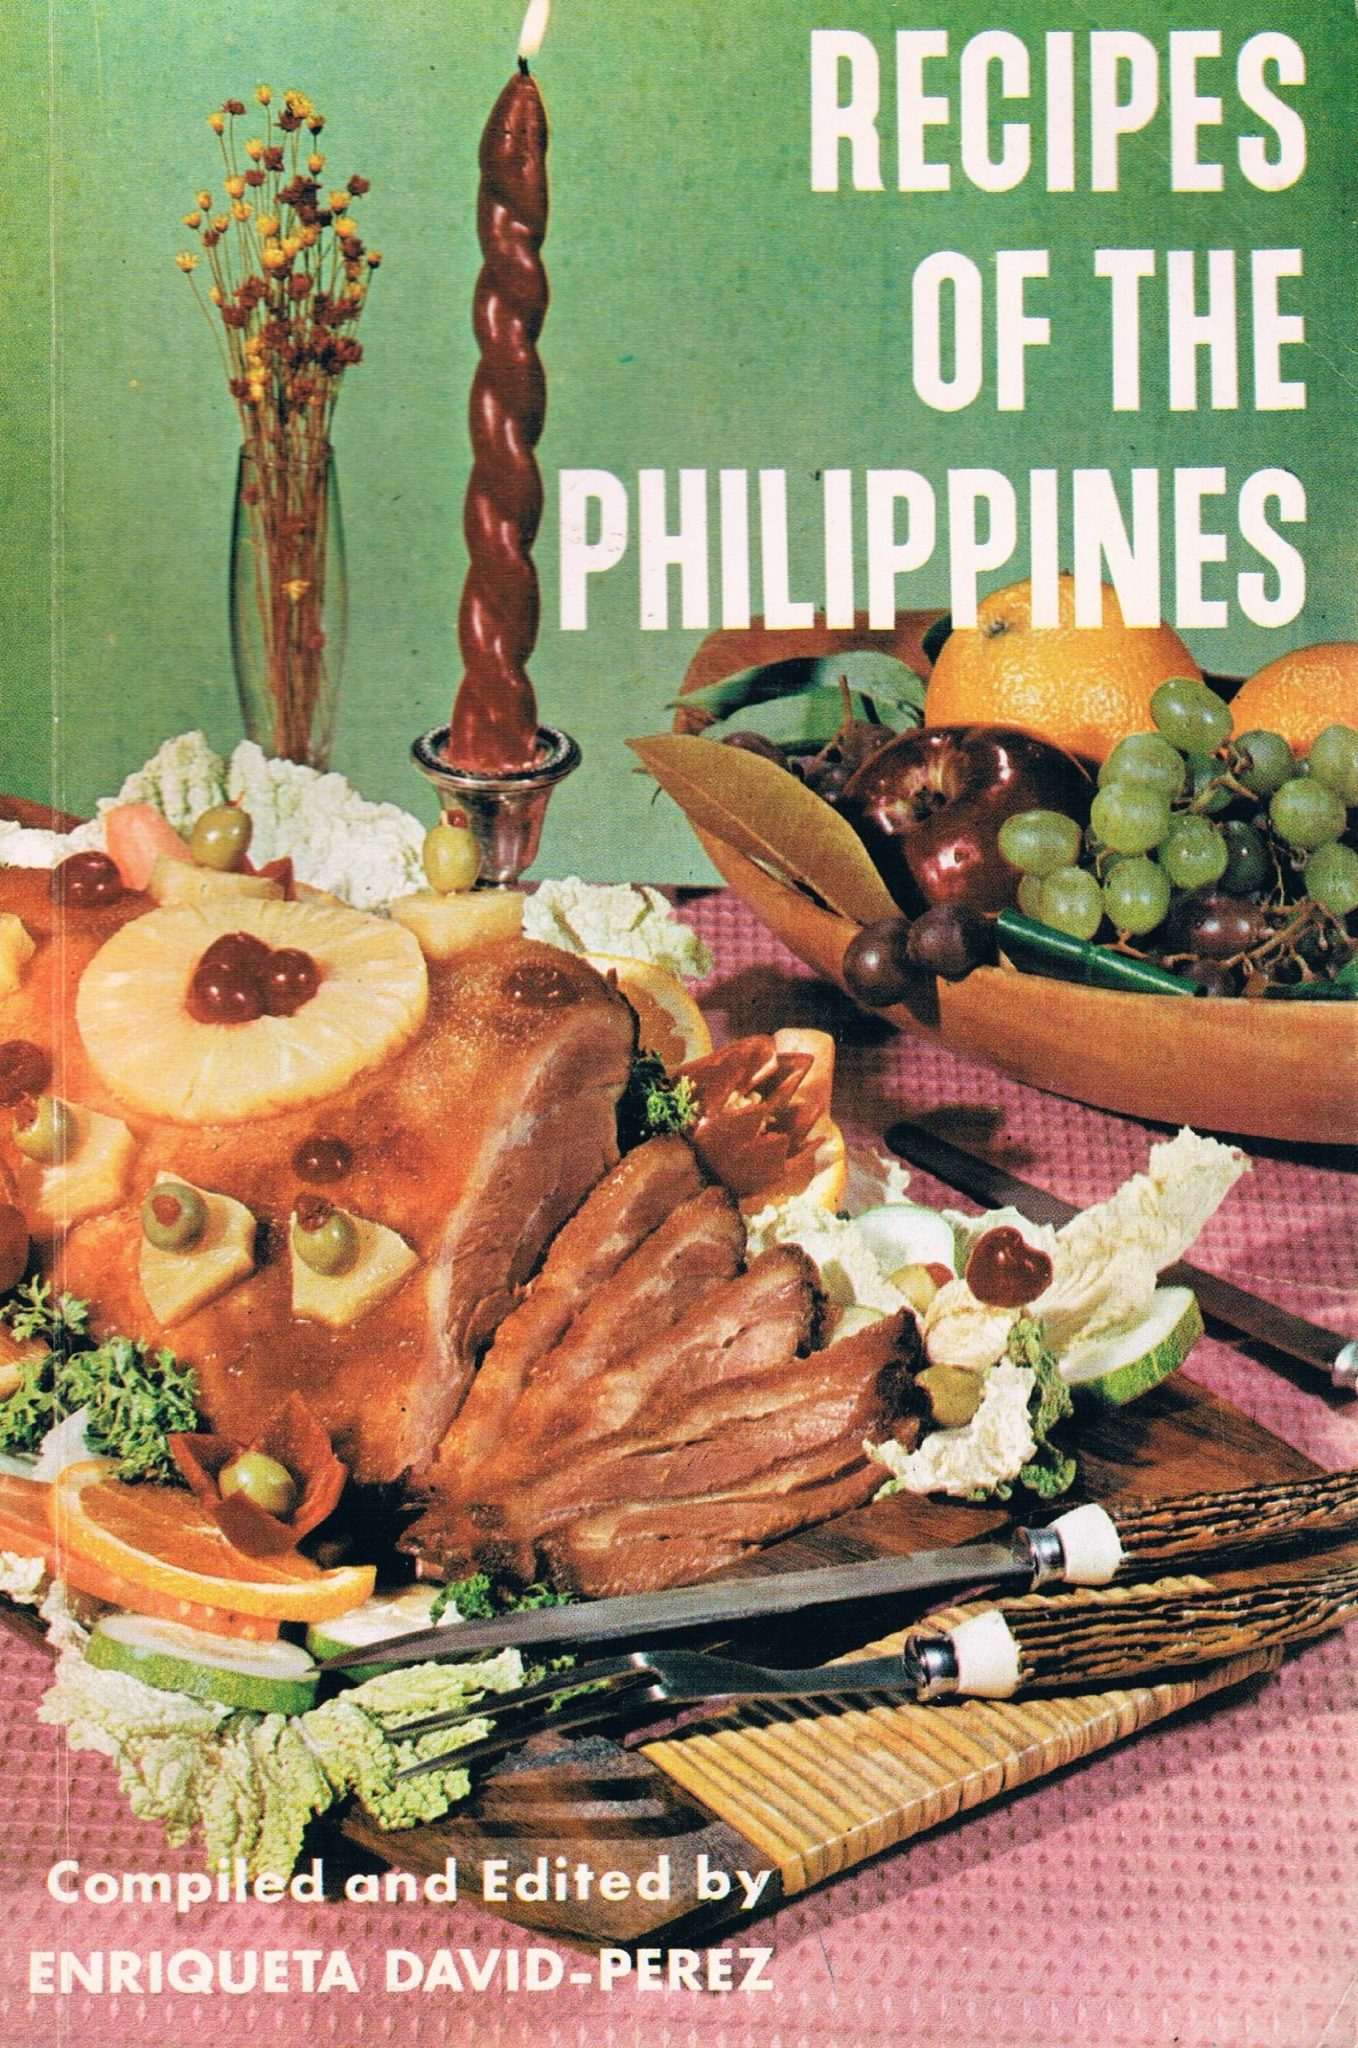 Defining cookbooks of the Philippines: "Recipes of the Philippines" by Enriqueta David-Perez